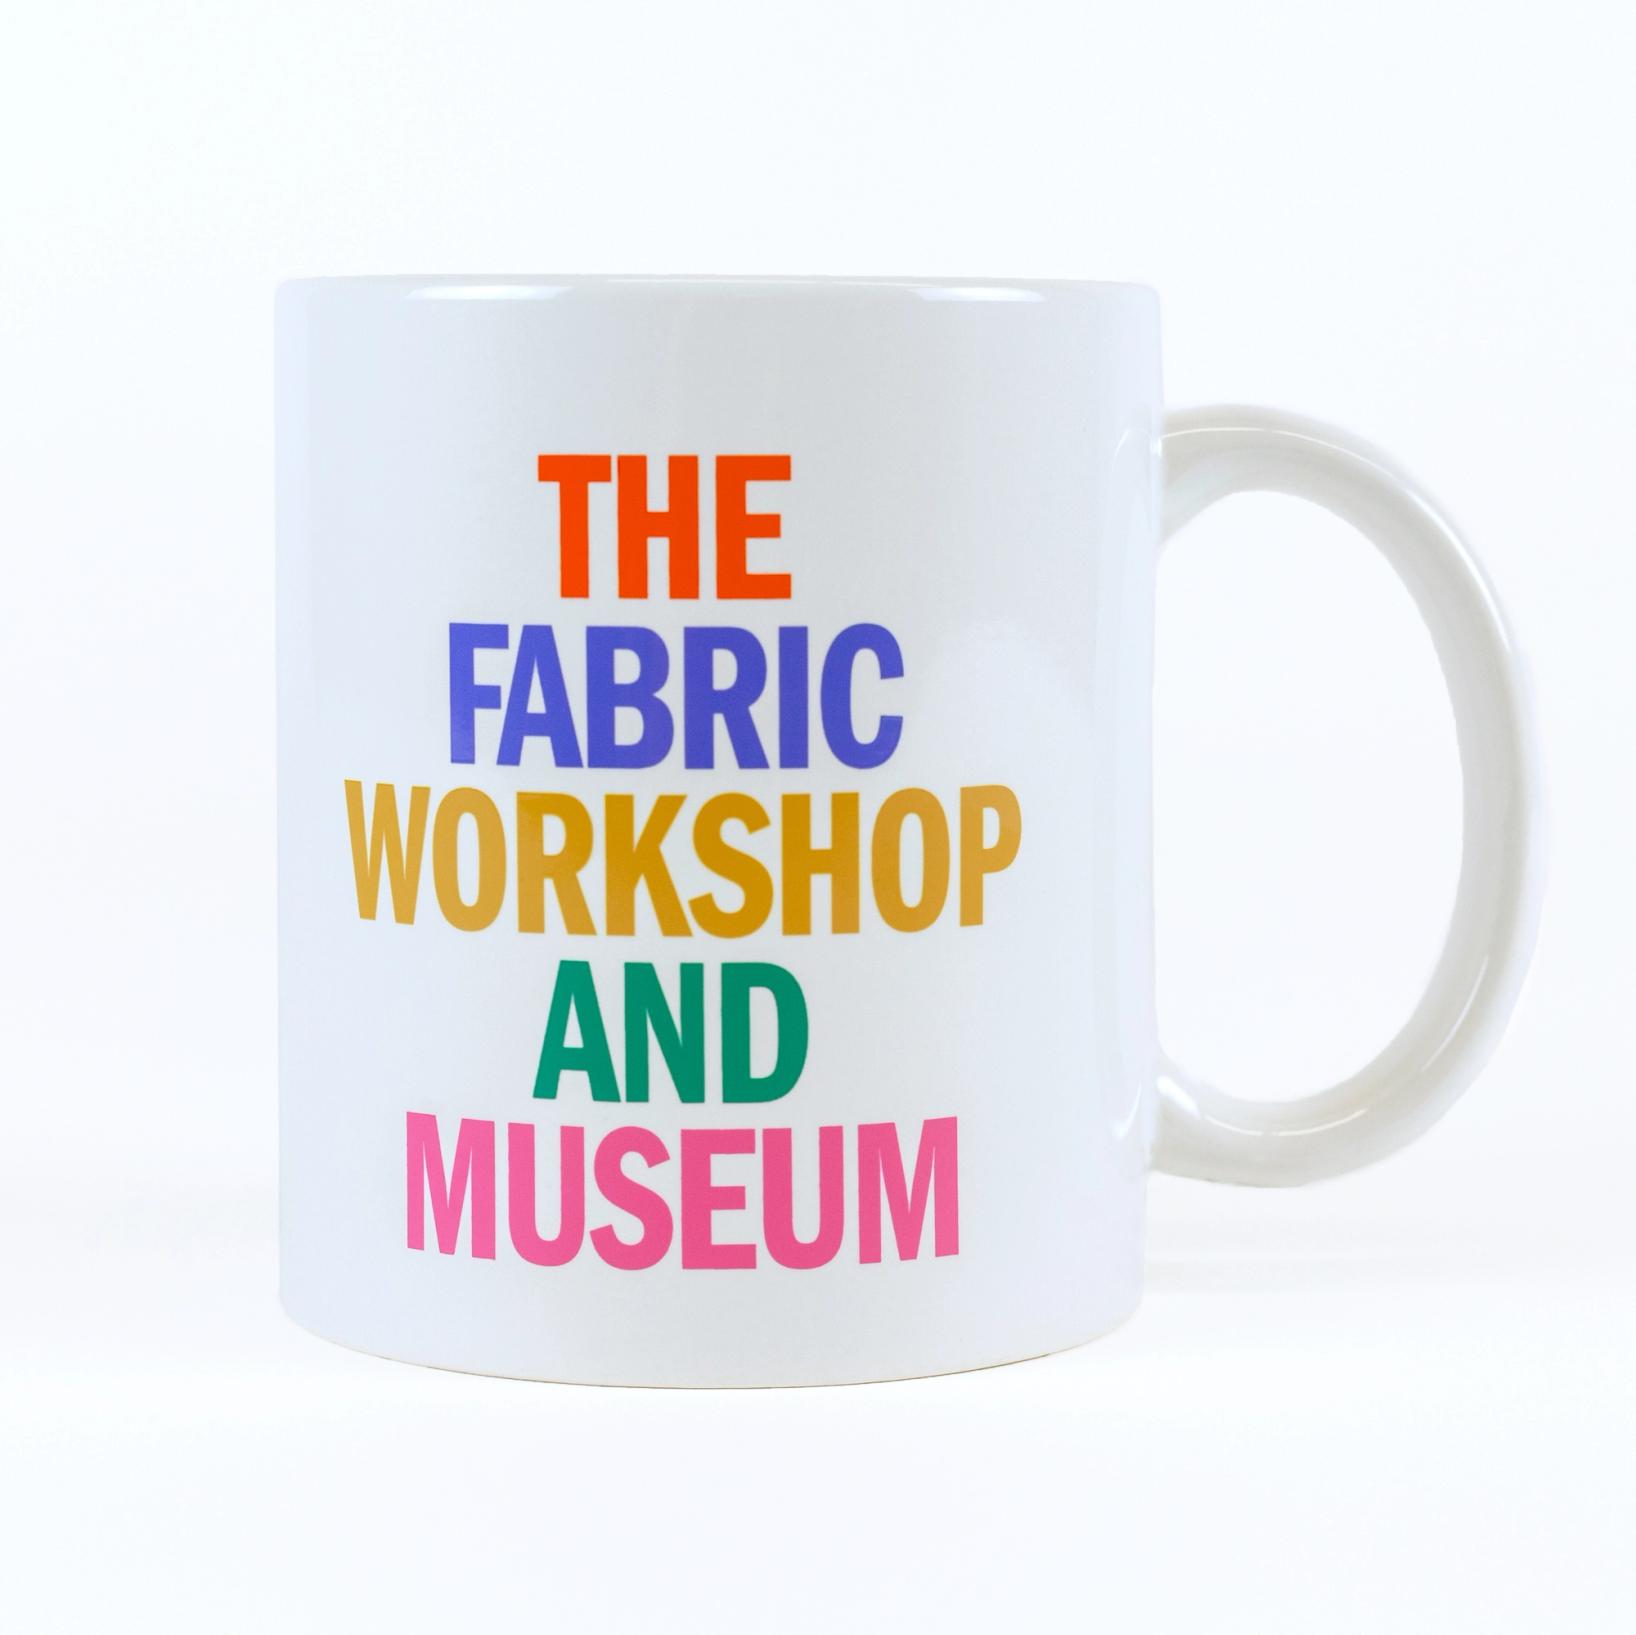 A cream colored mug against a white background says "THE FABRIC WORKSHOP AND MUSEUM". Each word is stacked and in a different color, red, blue, golden yellow, green, and pink.